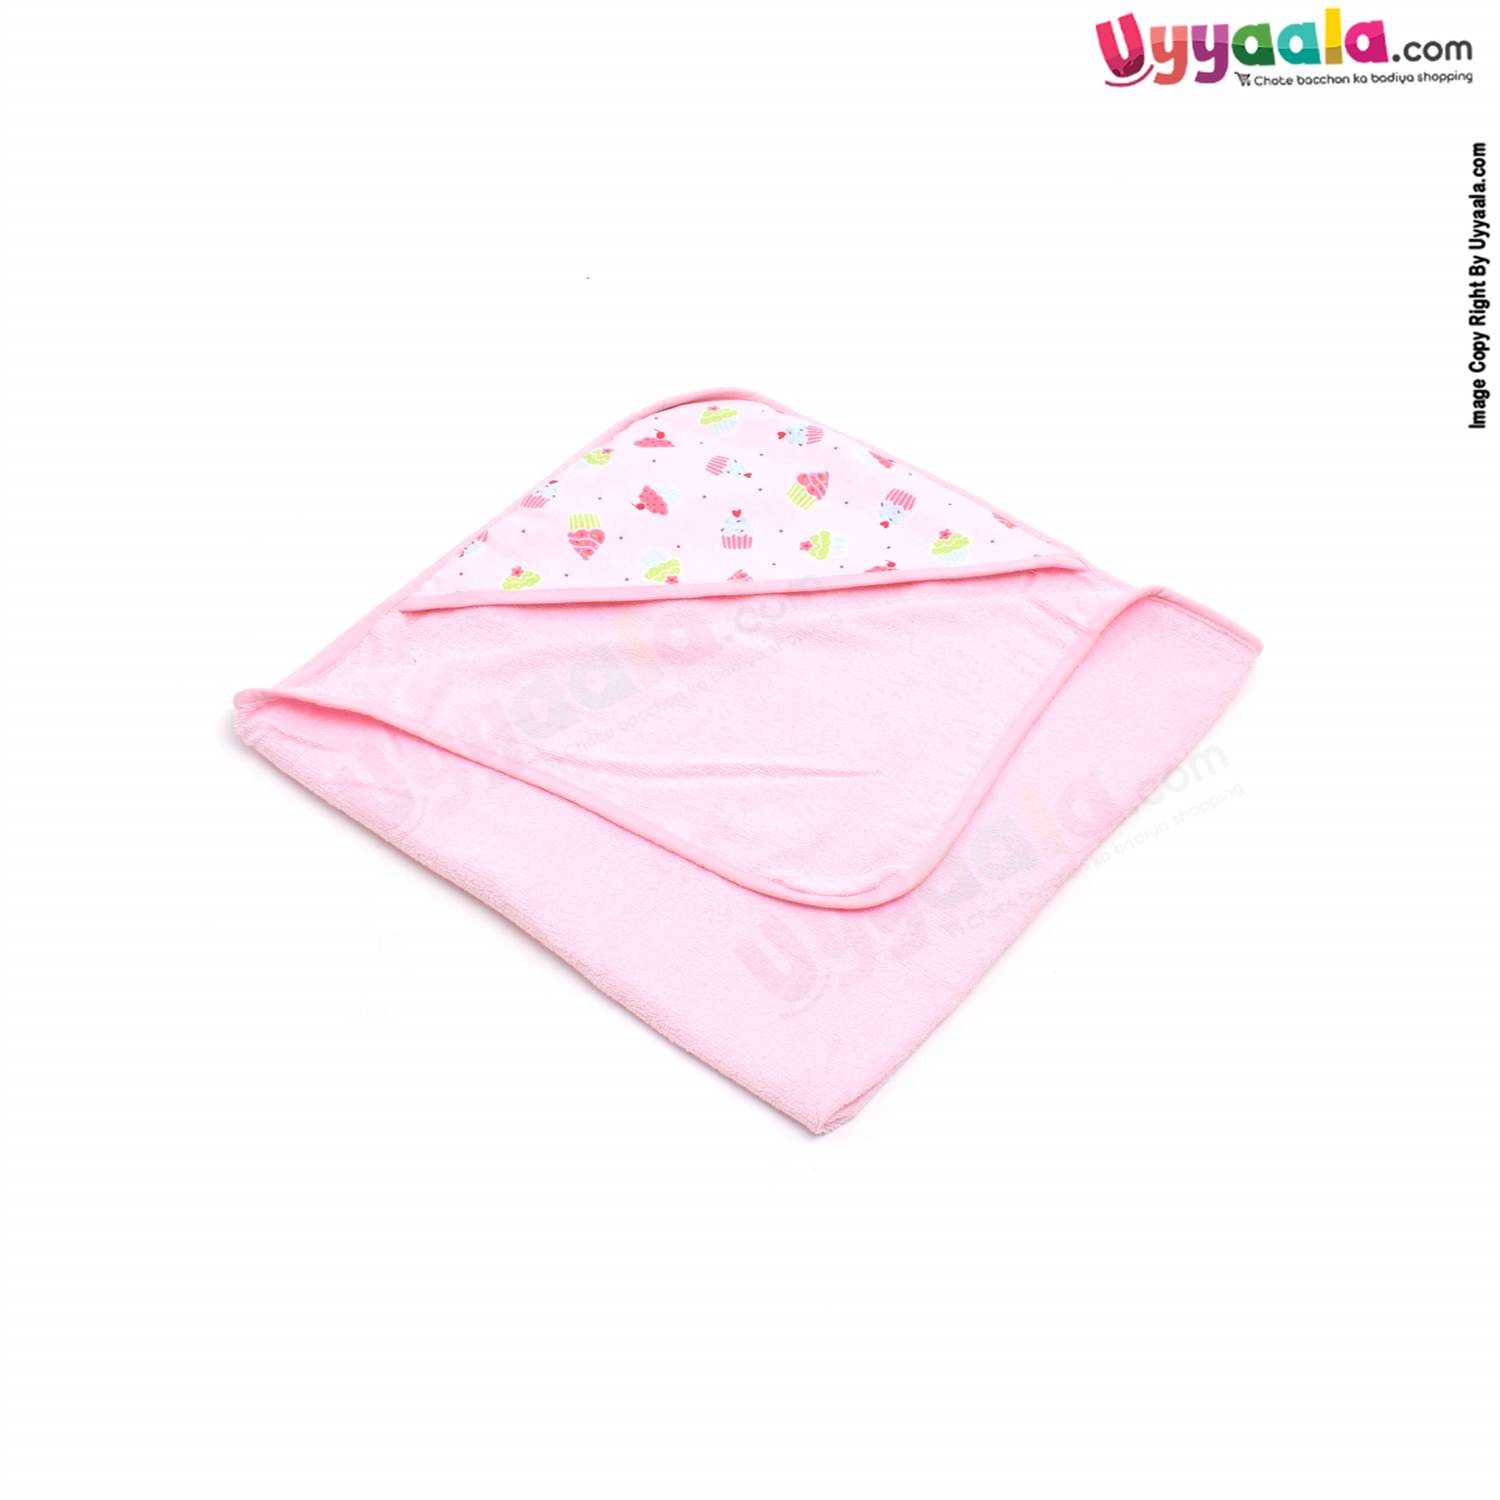 EBERRY Terry Hooded Towel with Ice Cream Print 1pc ,0+m Age ,Size (76*74) - Pink